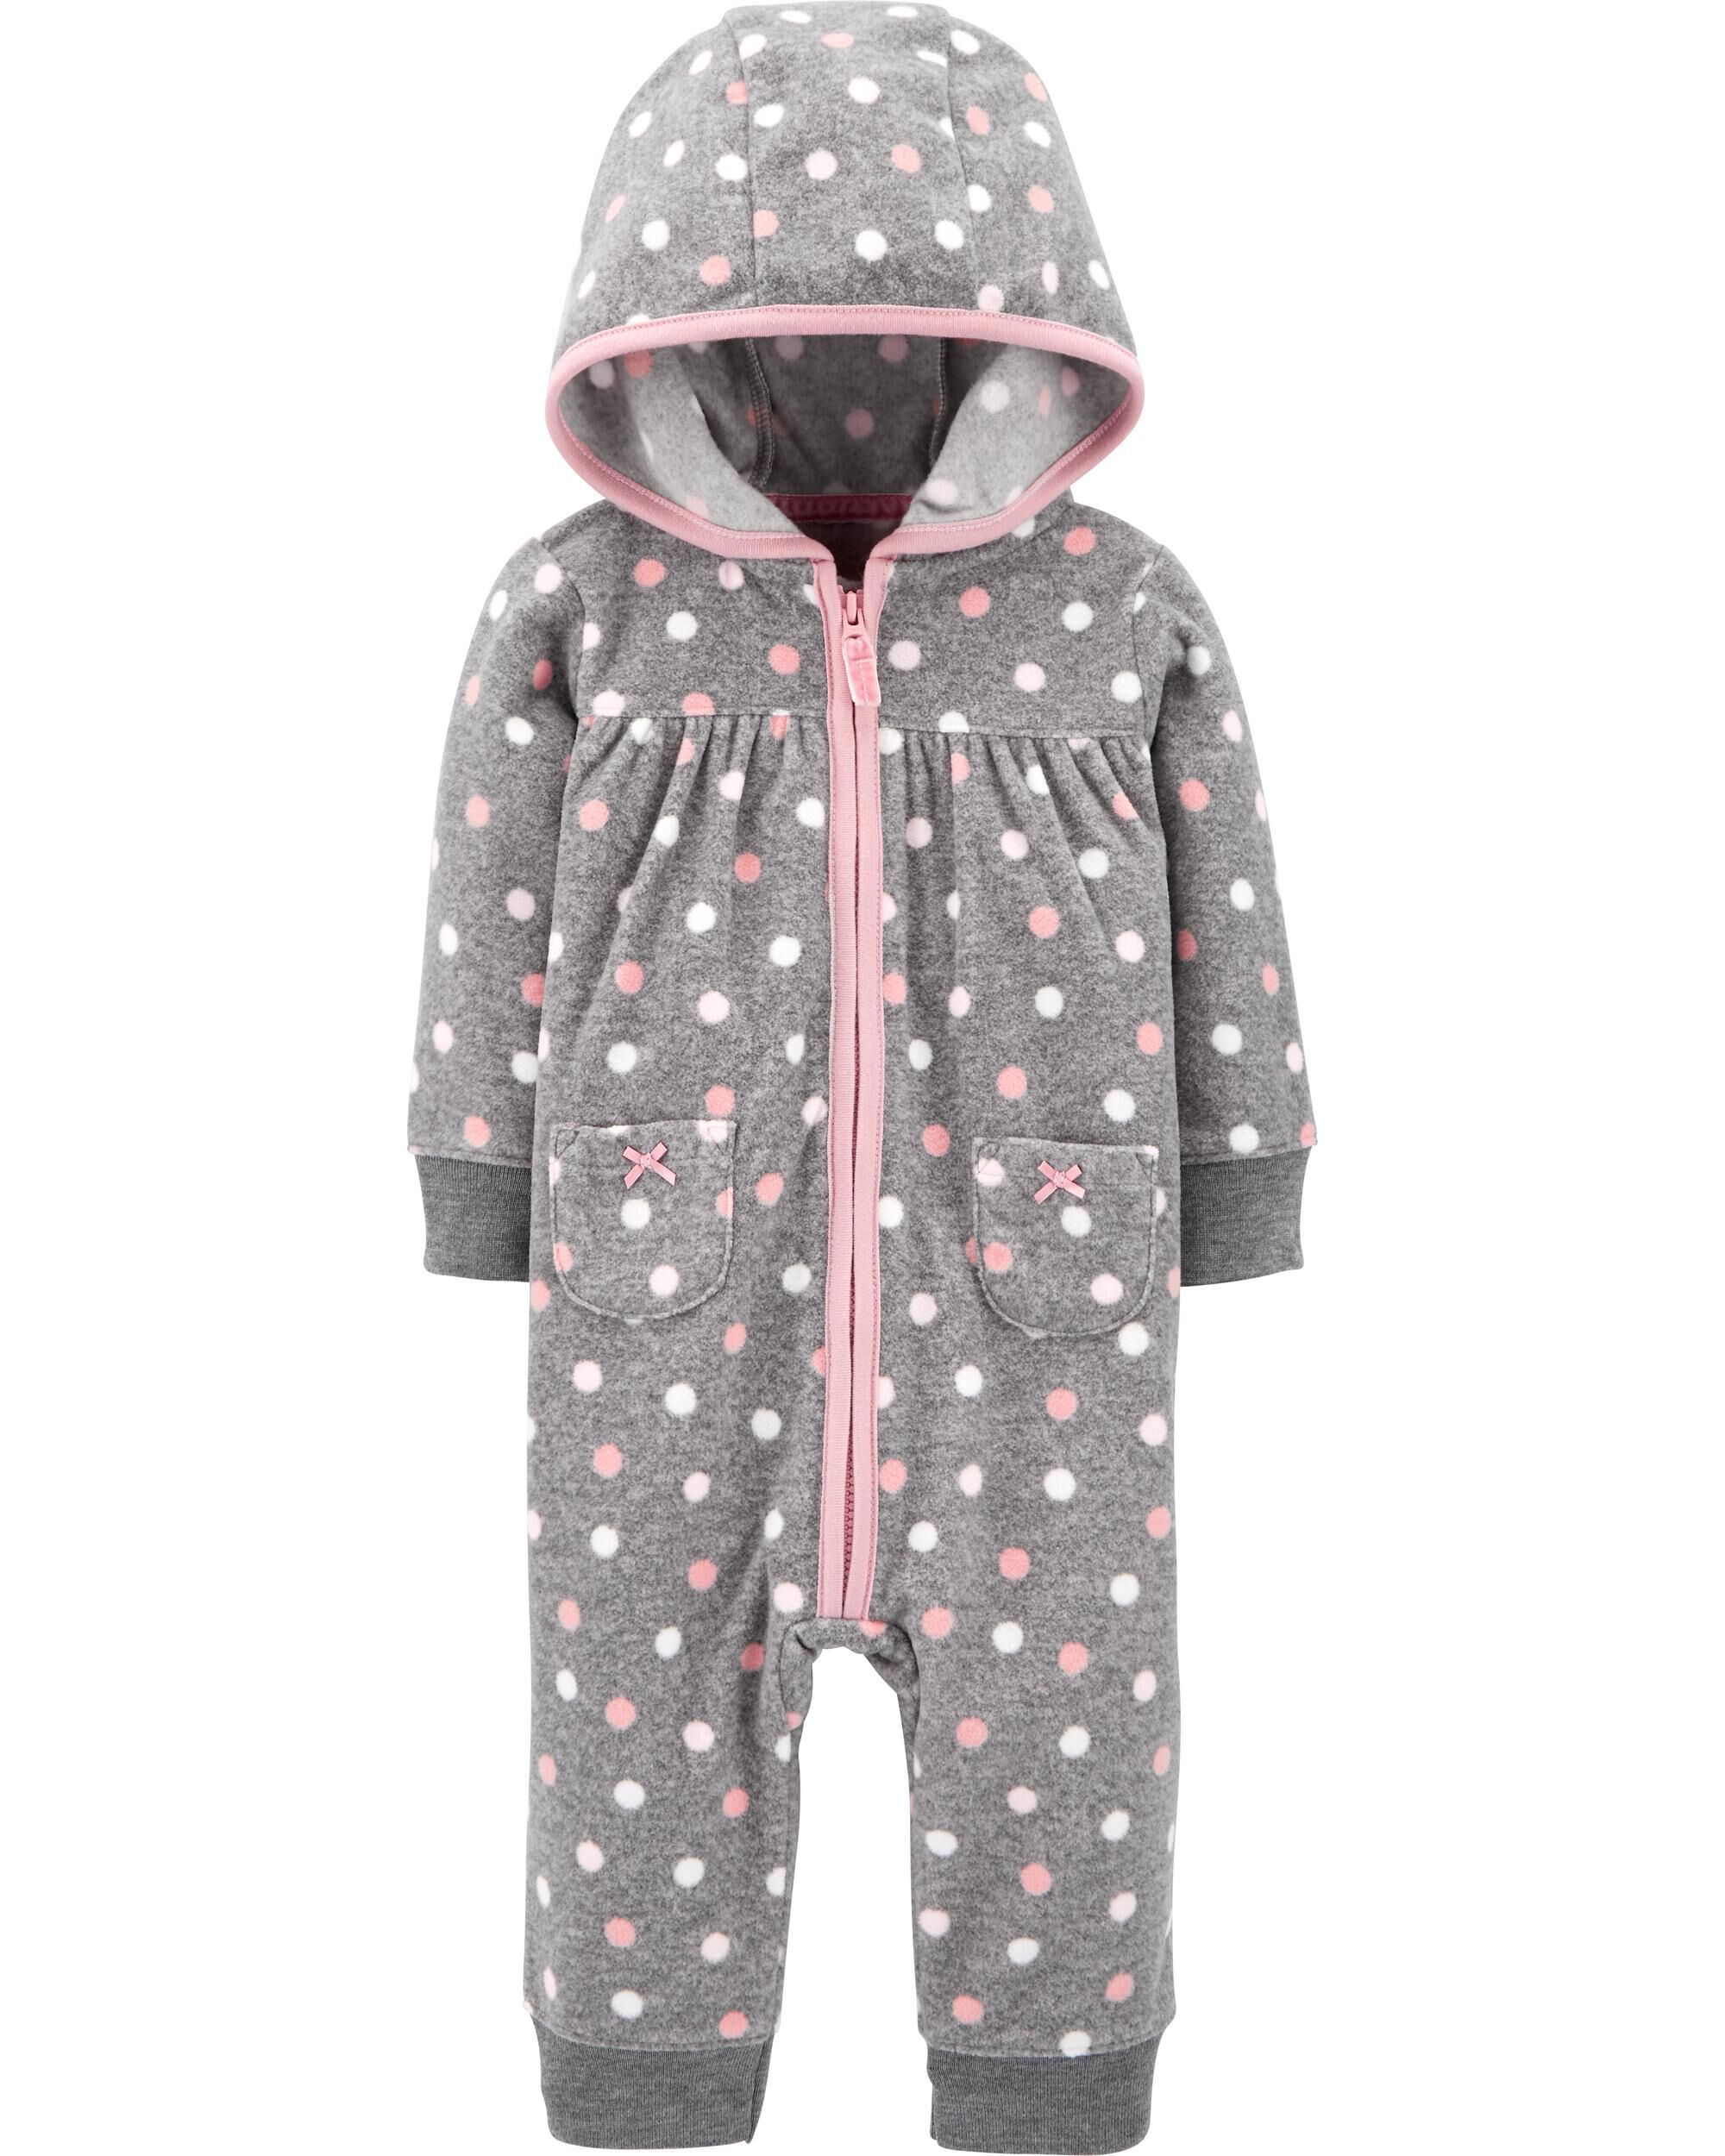 baby winter clothes clearance